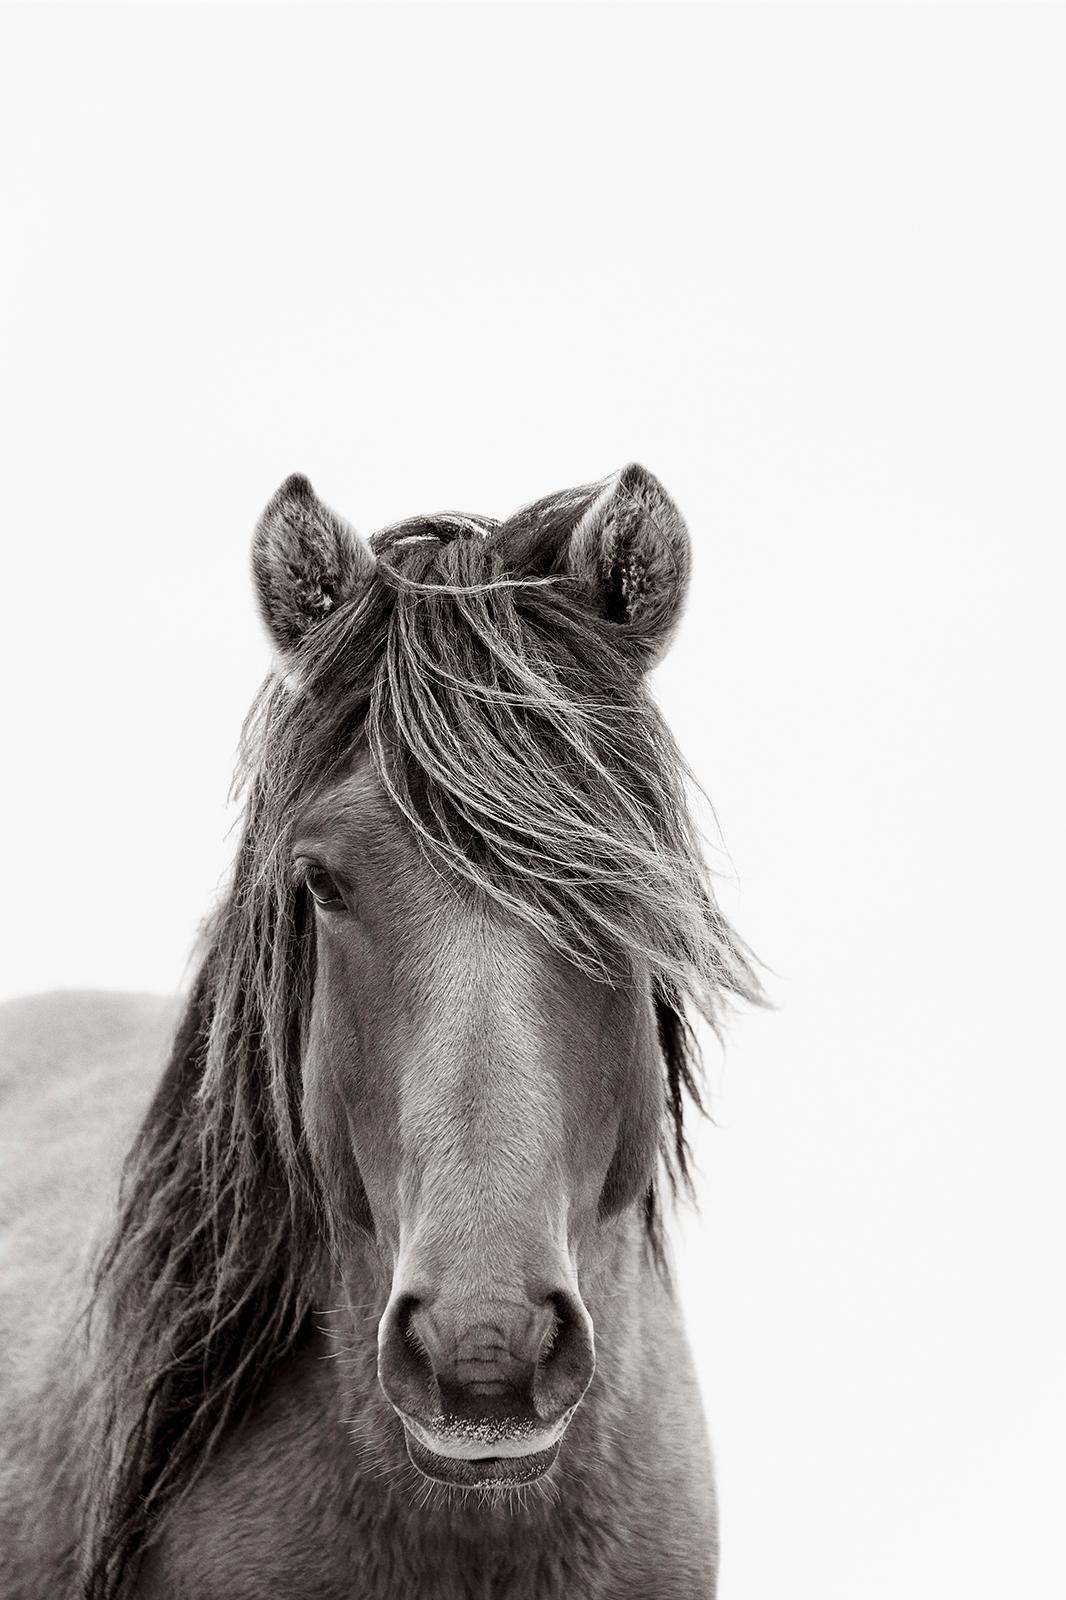 Drew Doggett Black and White Photograph - A Single Wild Horse Looking at the Camera on Sable Island